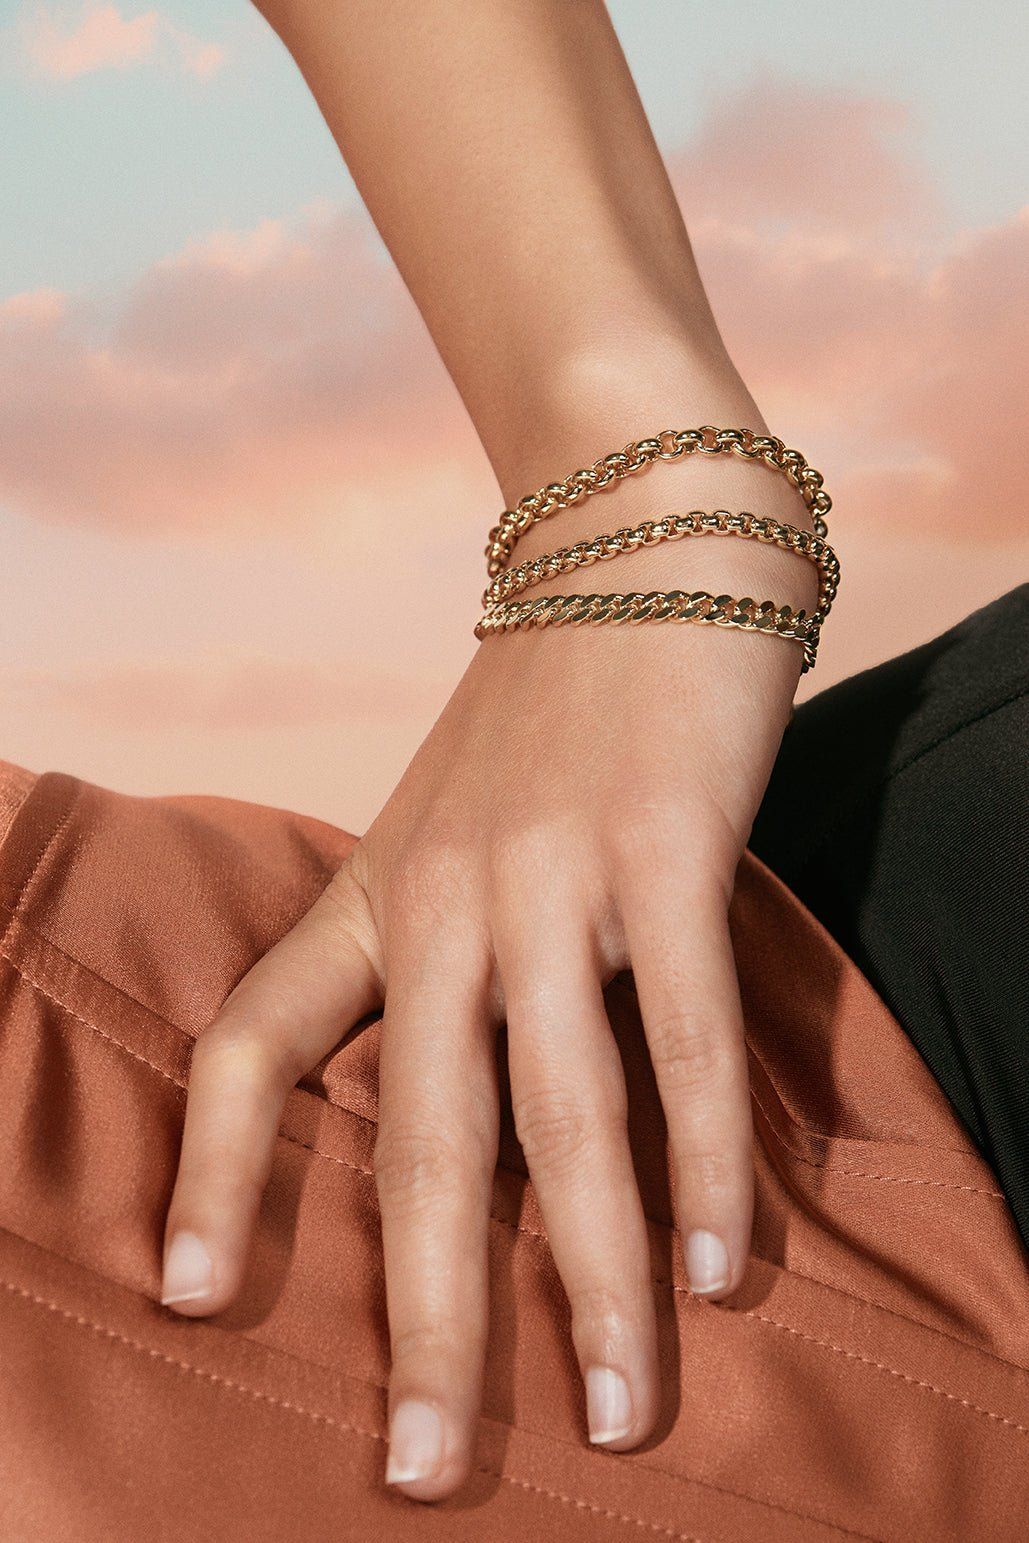 a woman's hand wearing a gold chain bracelet